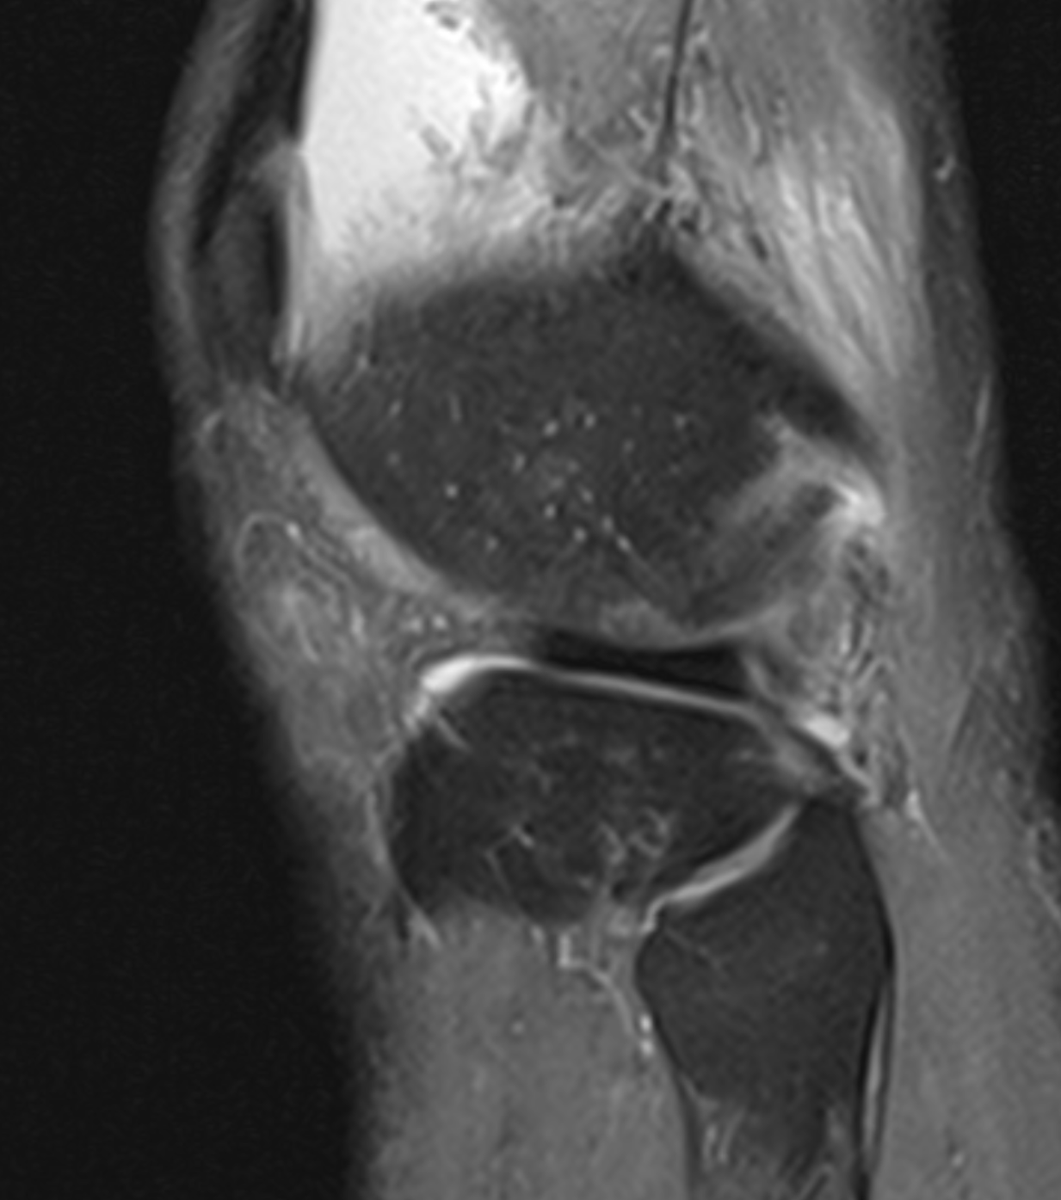 PLC Injury Tear of LCL and Popliteal tendon. Ill defined arcuate lig. Partial Thickness tear ACL.